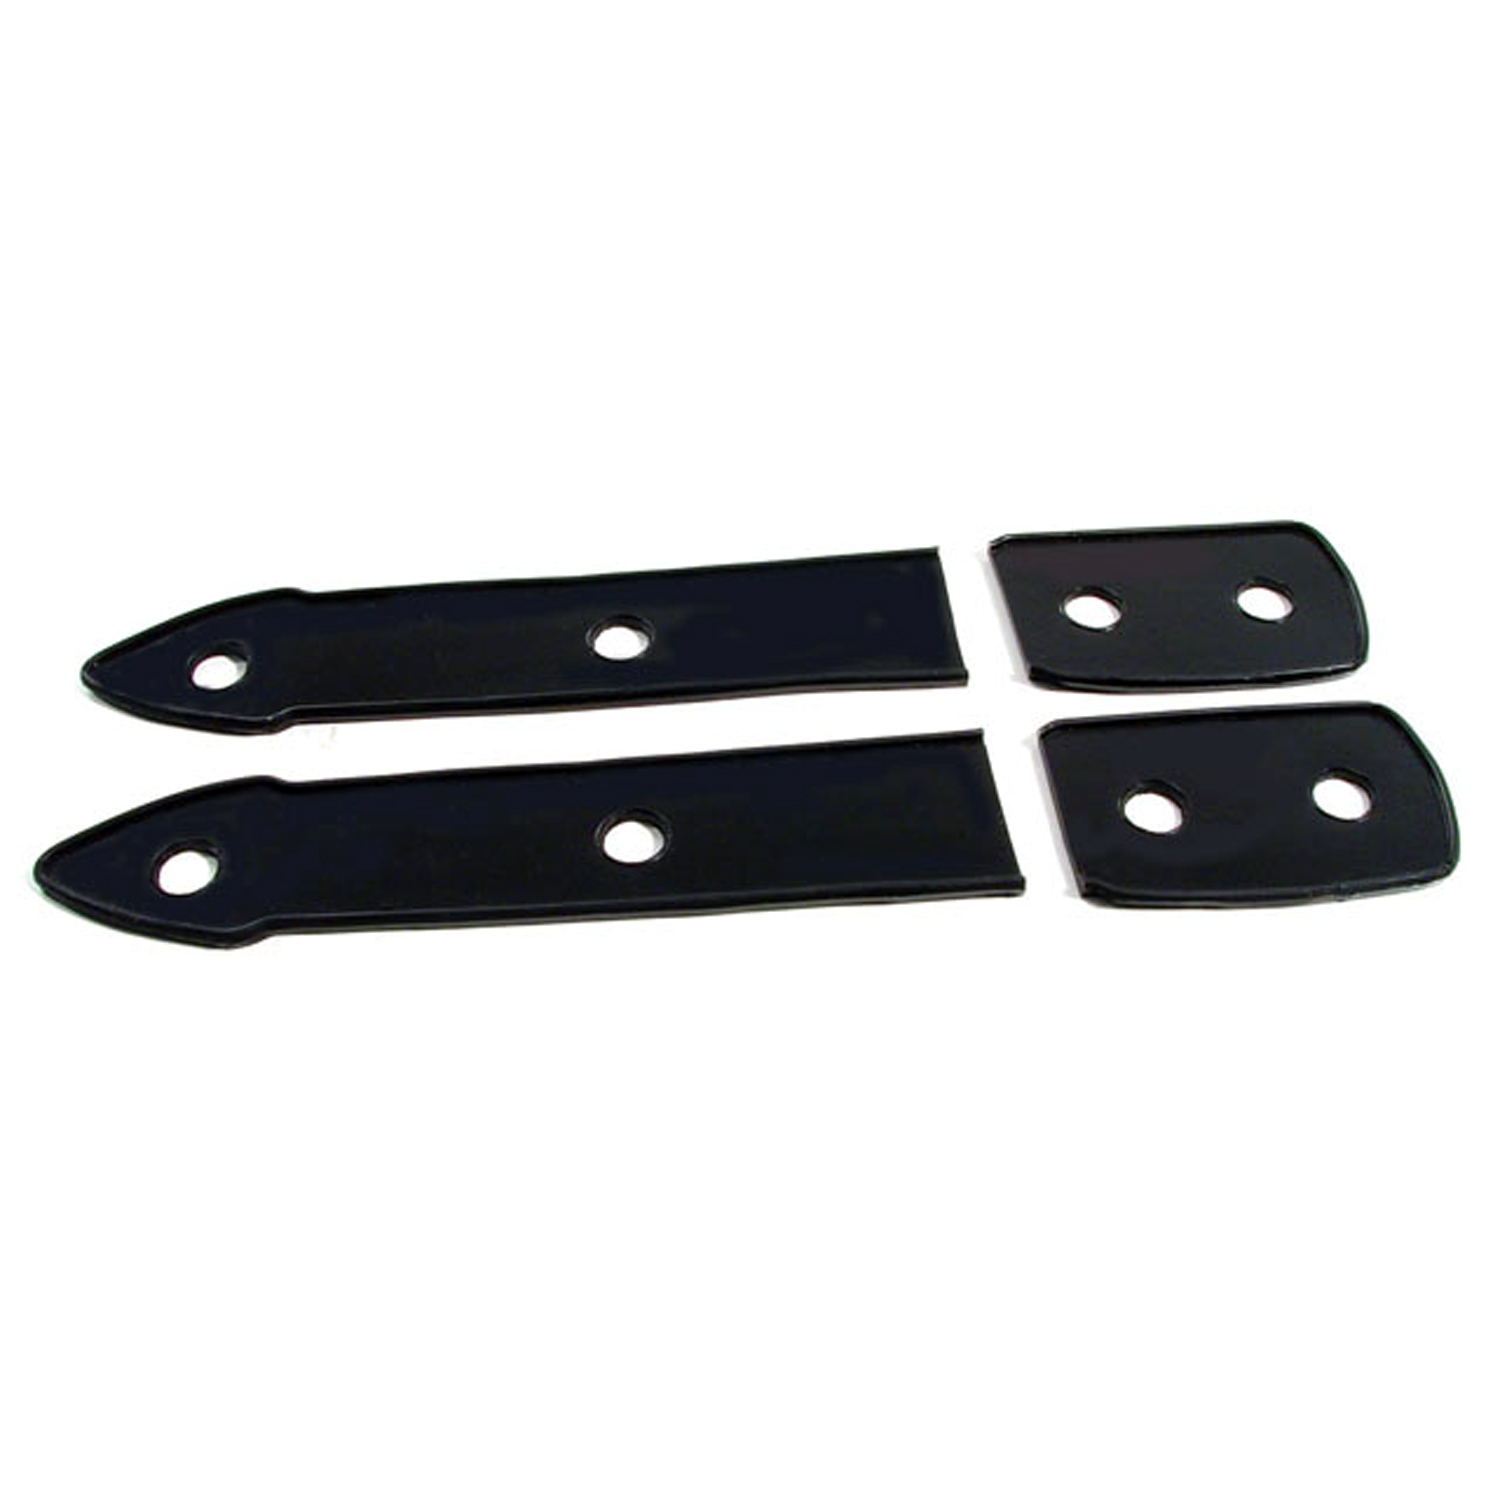 1938 Buick Special 40 Trunk Hinge Pads.  1-5/8 wide X 8-3/8 long.  4-Piece Set-MP 335-B